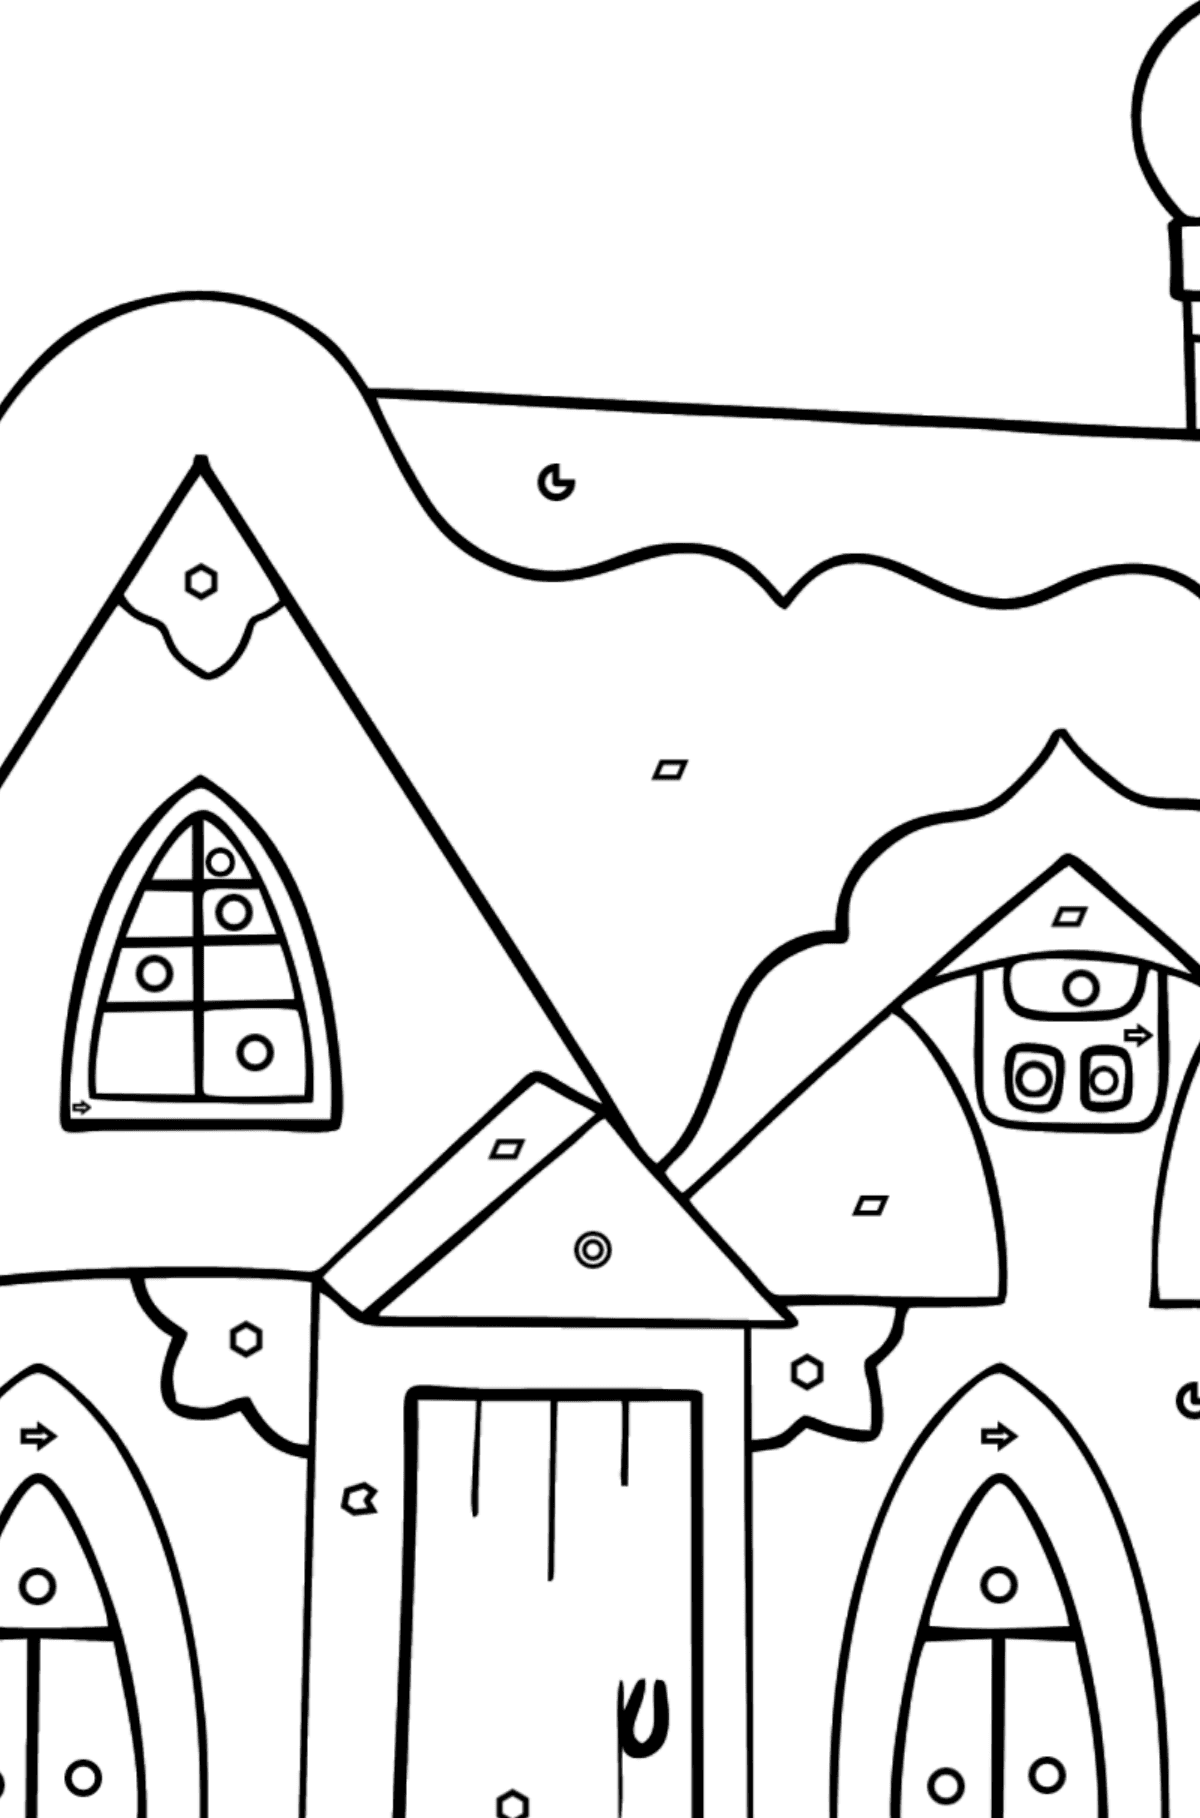 Complex Coloring Page - A Fairytale House - Coloring by Geometric Shapes for Kids